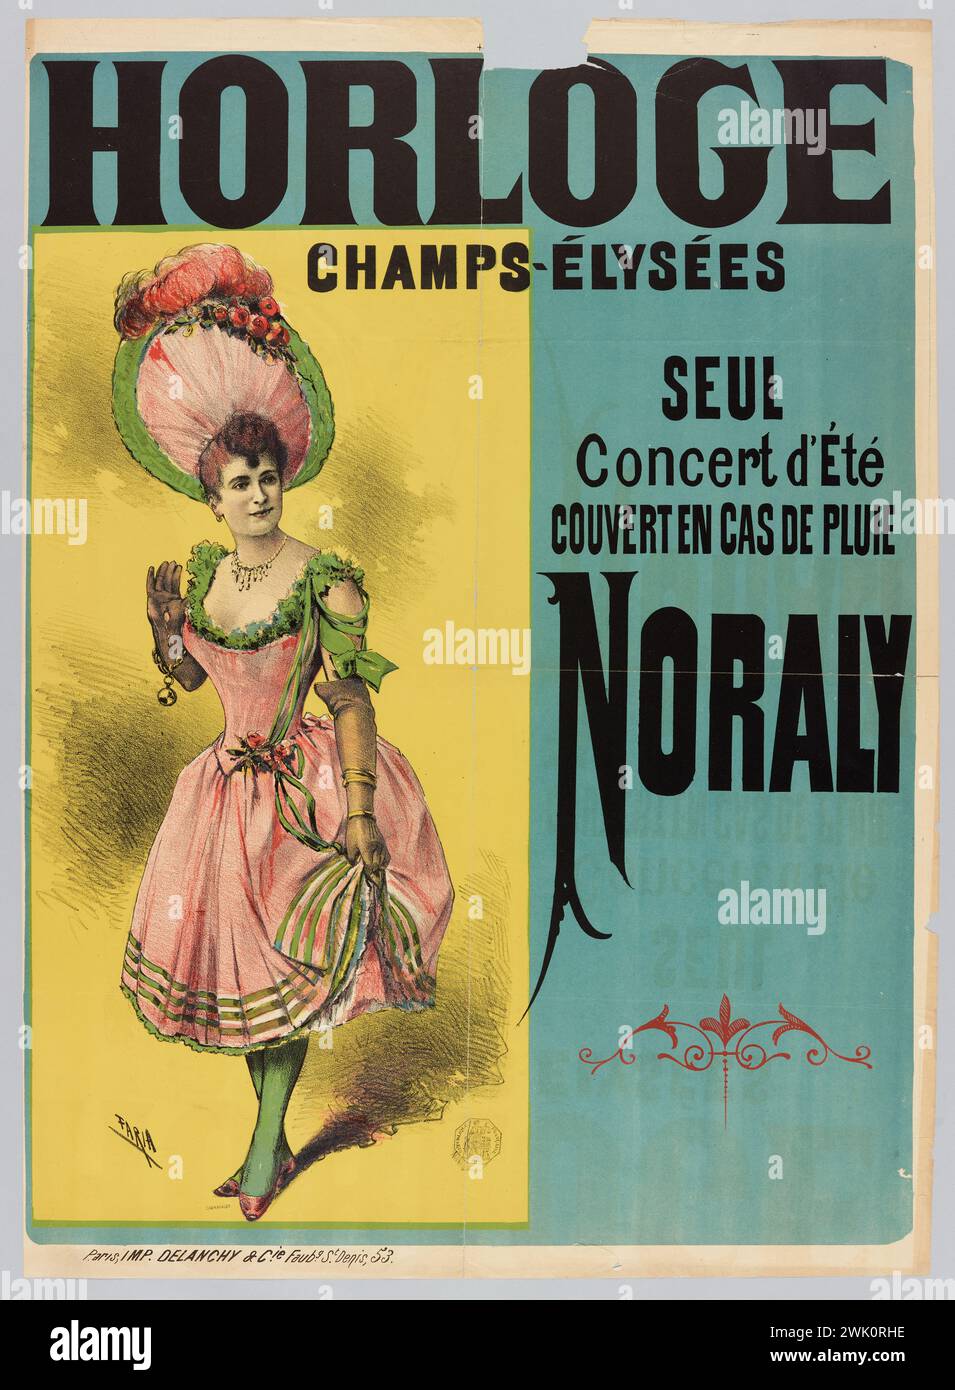 Faria, candido Aragonez de (n.1849-08-12-D.1911-12-17), clock/ champs-elyse/ alone/ Summer/ covered concert in case of rain/ Noraly (registered title (letter)) , 1880. Color lithography. Carnavalet museum, history of Paris. Stock Photo